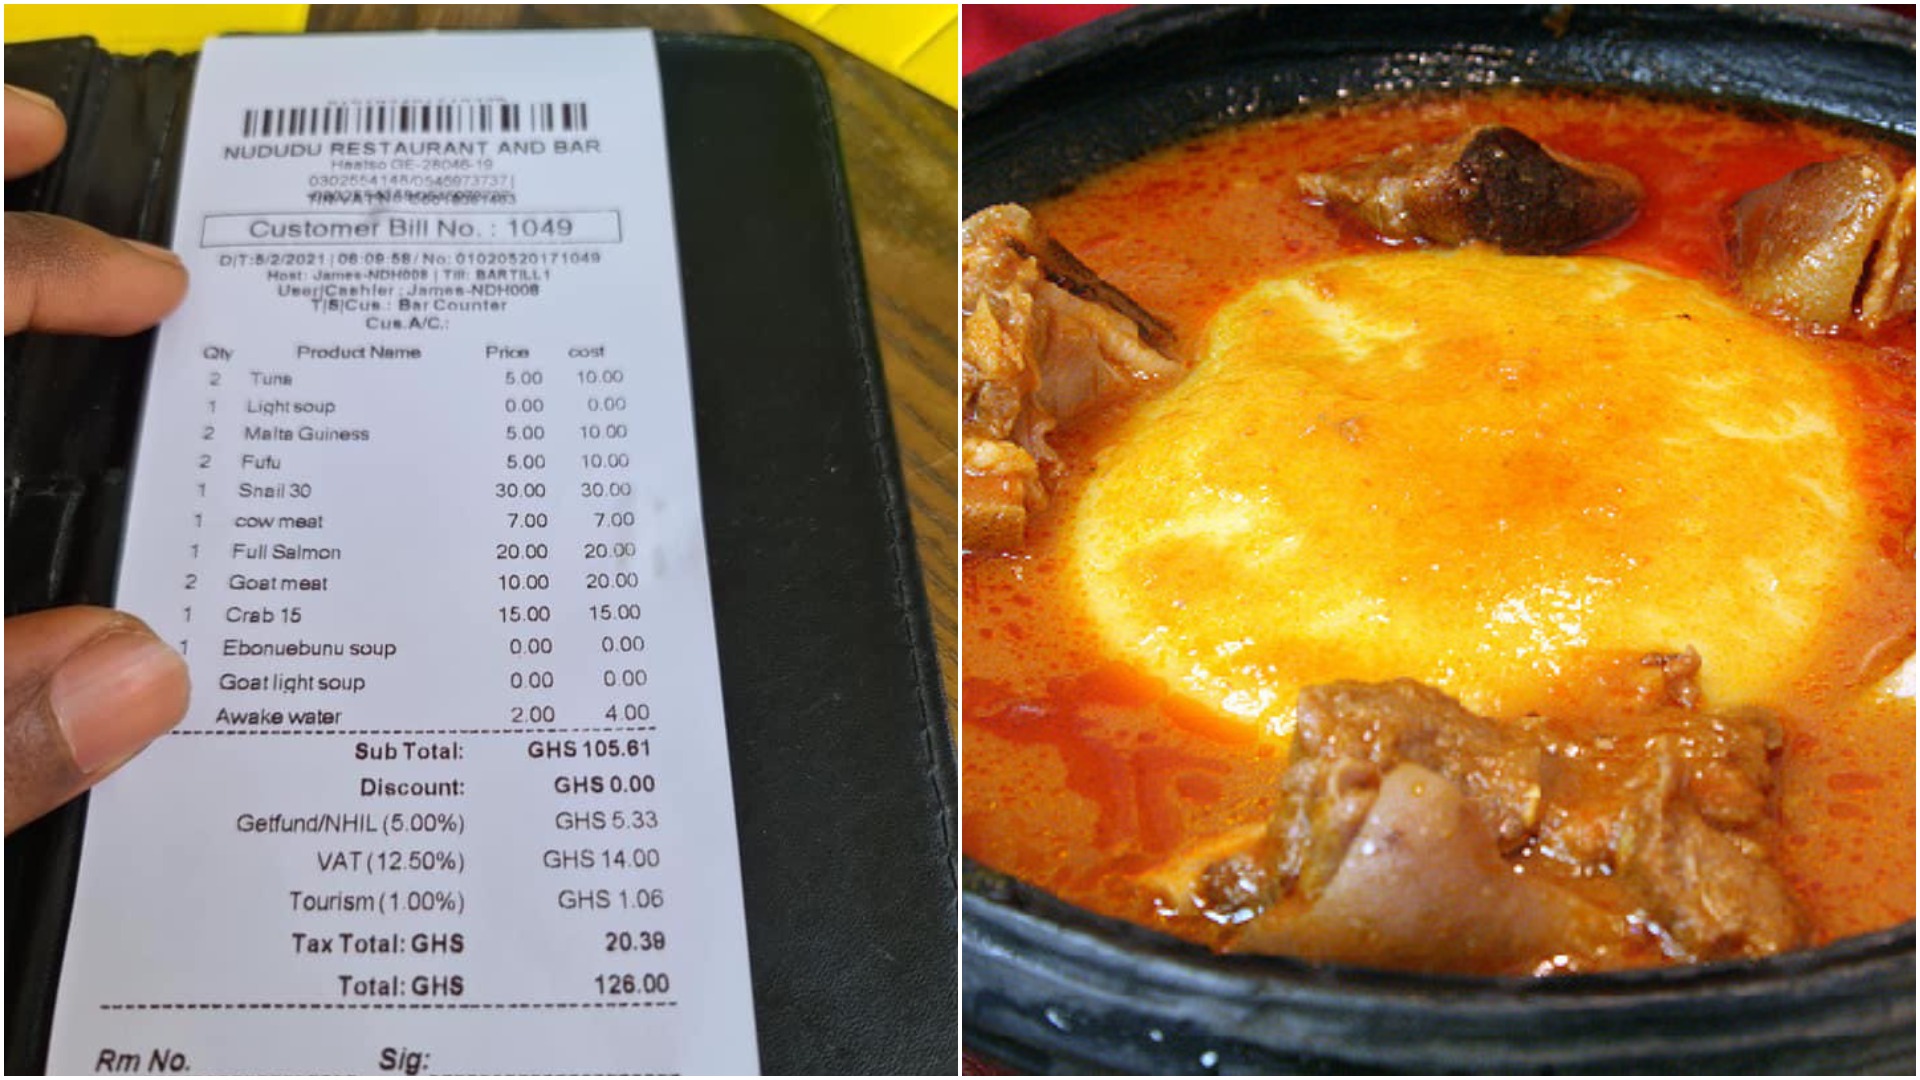 Supporter of #FixTheCountry protest drops receipt tax of 20 cedis he paid for a bowl of Fufu